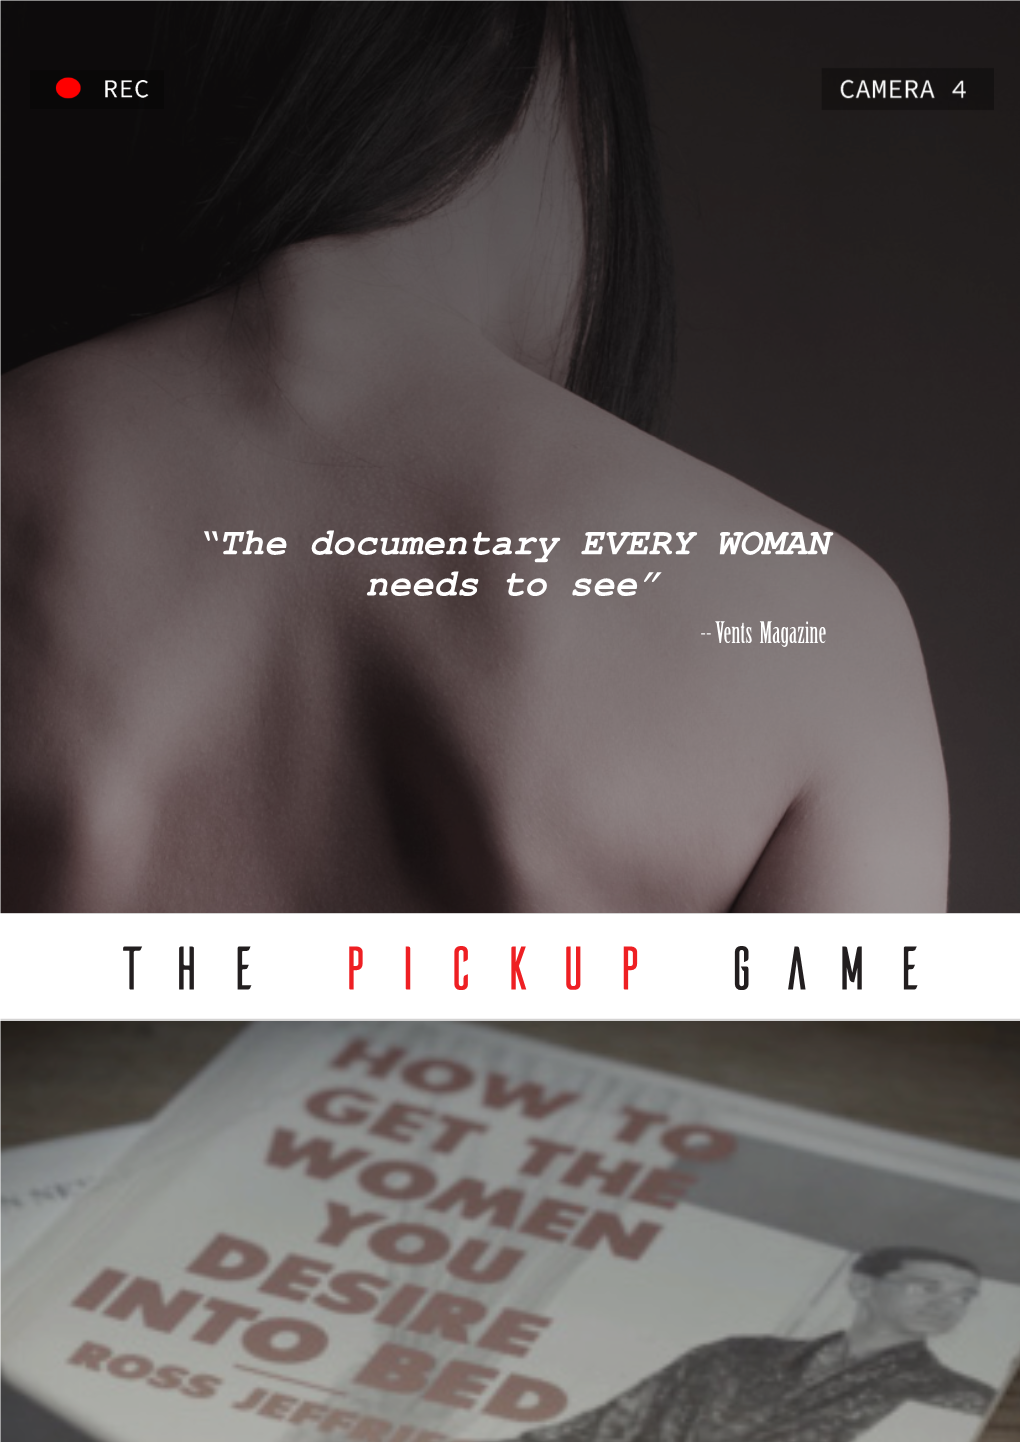 THE PICKUP GAME the PICKUP GAME - Info@Ivyfilm.Com the PICKUP GAME - Info@Ivyfilm.Com